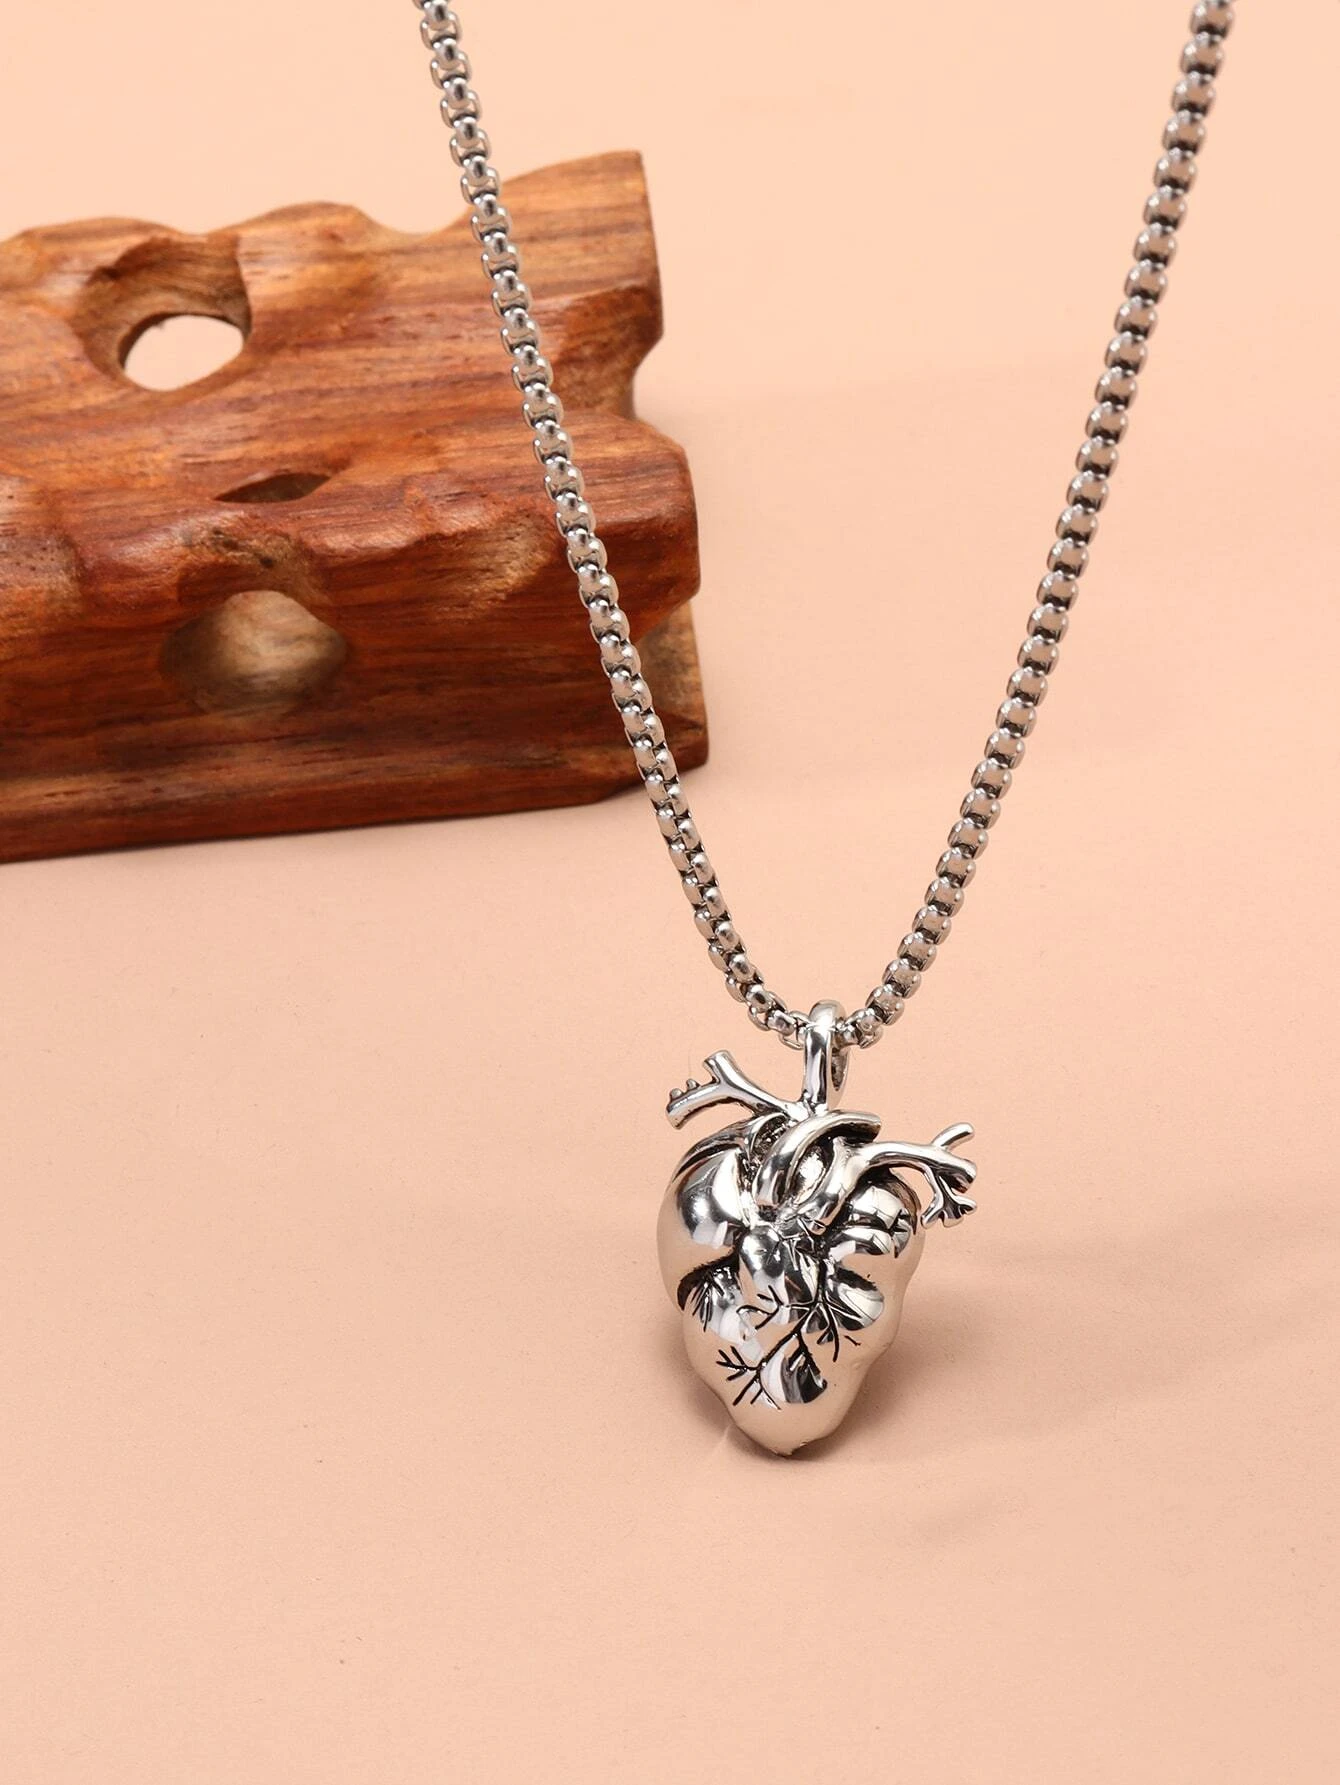 1pc Heart Organ Pendant Necklace, Stainless Steel Jewelry